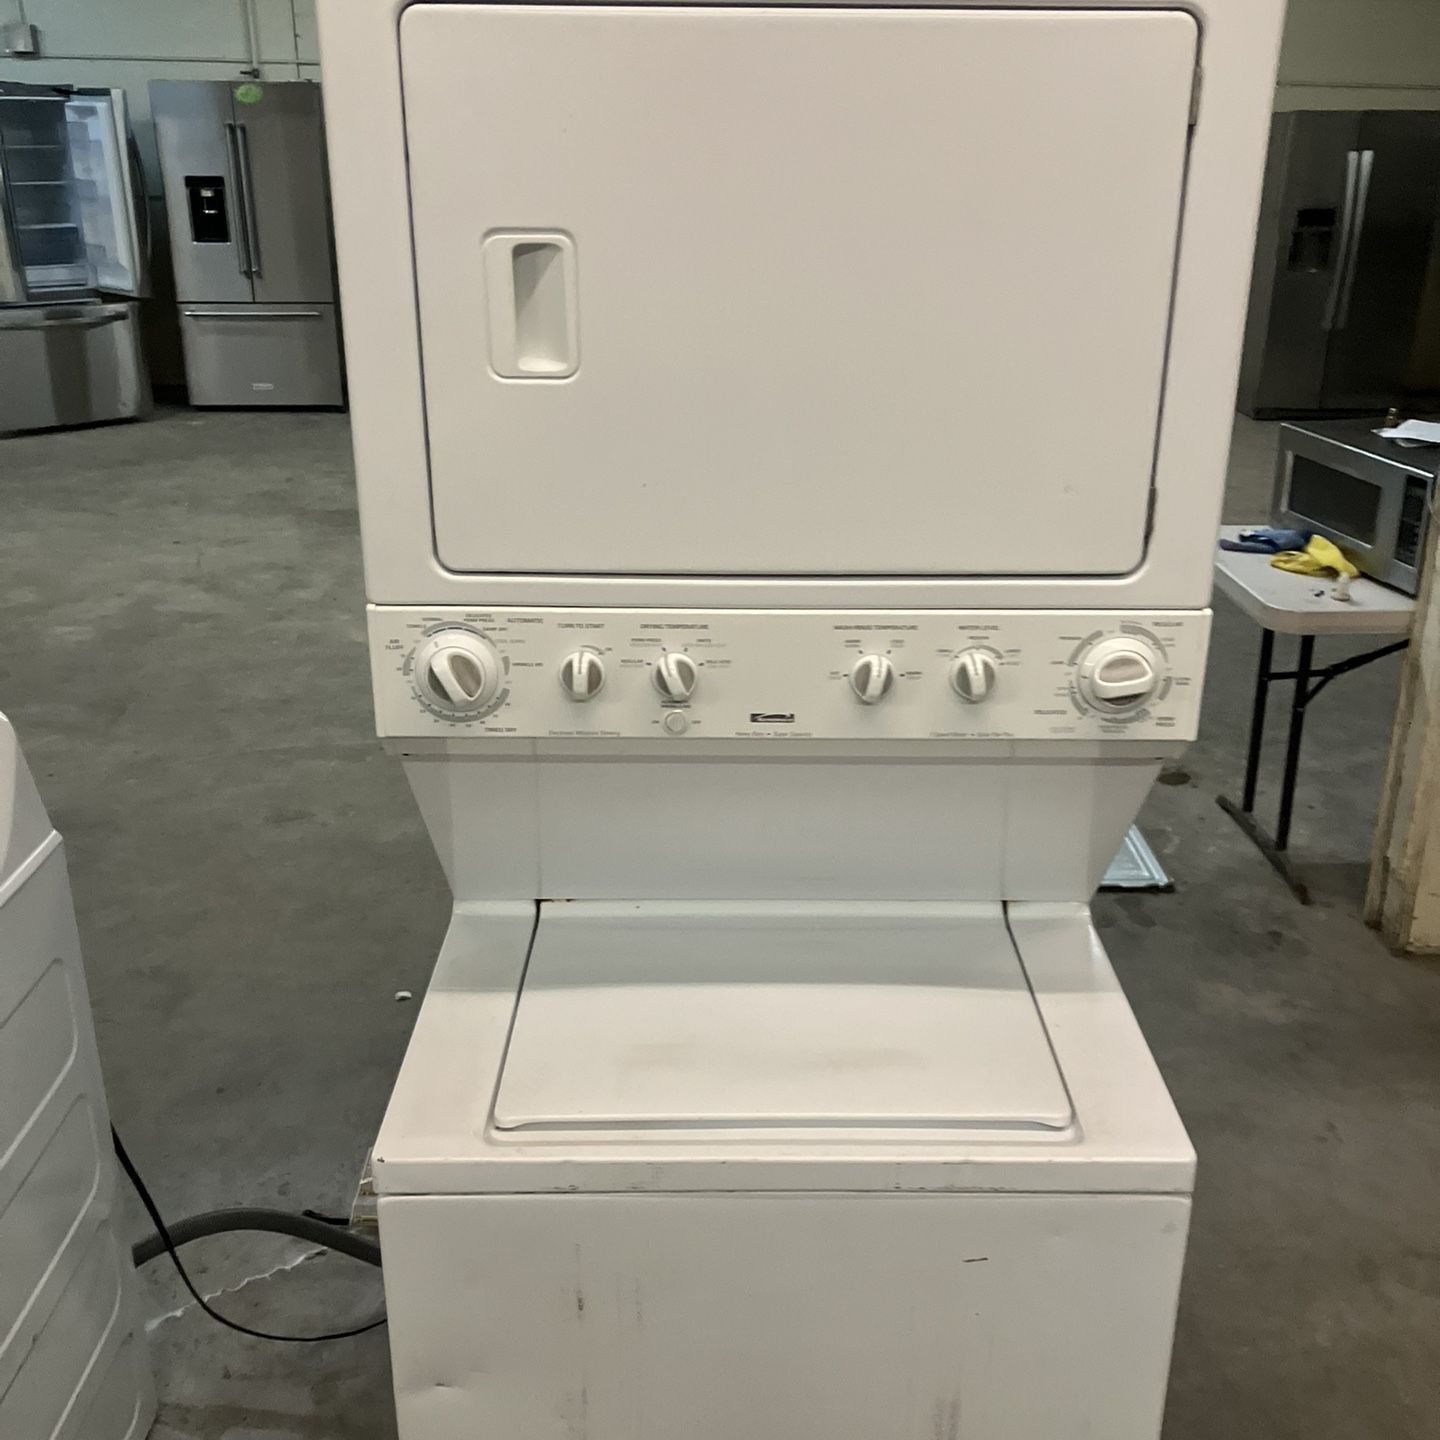 Washer And Dryers